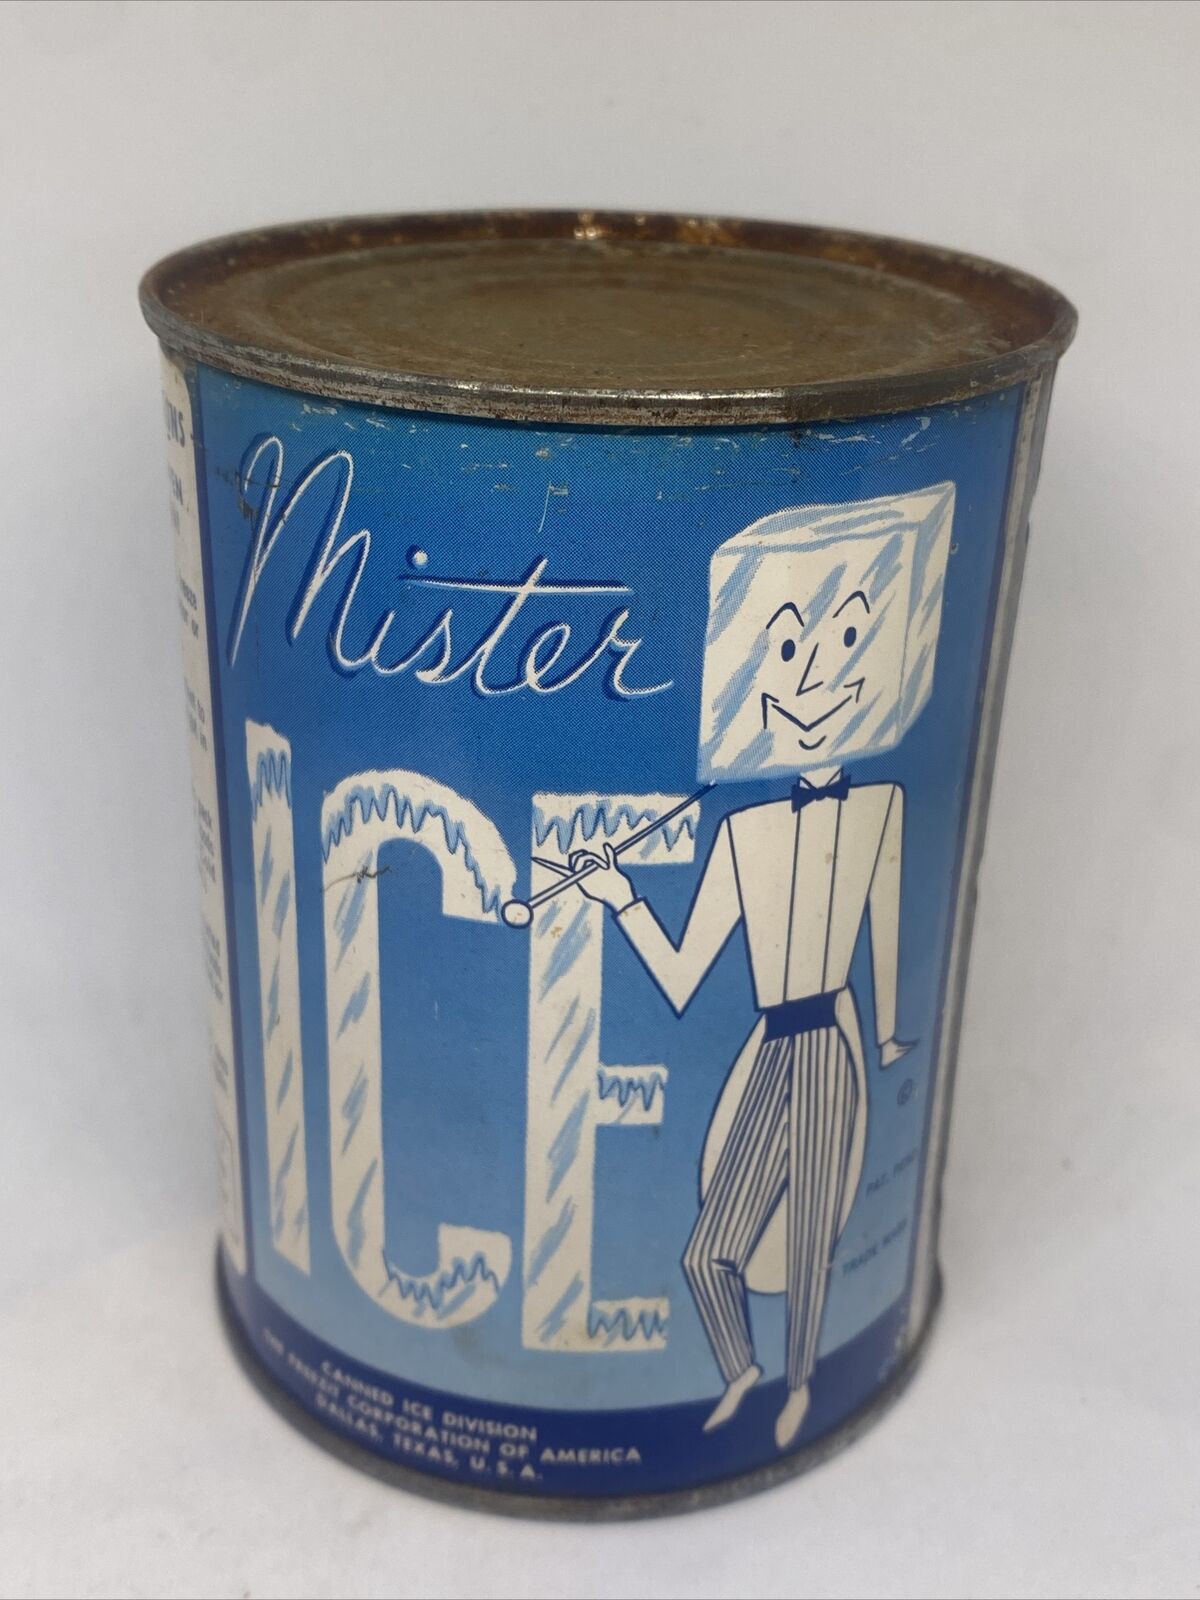 Vintage Mister Ice Canned Ice - Full No Dents & Nice Label